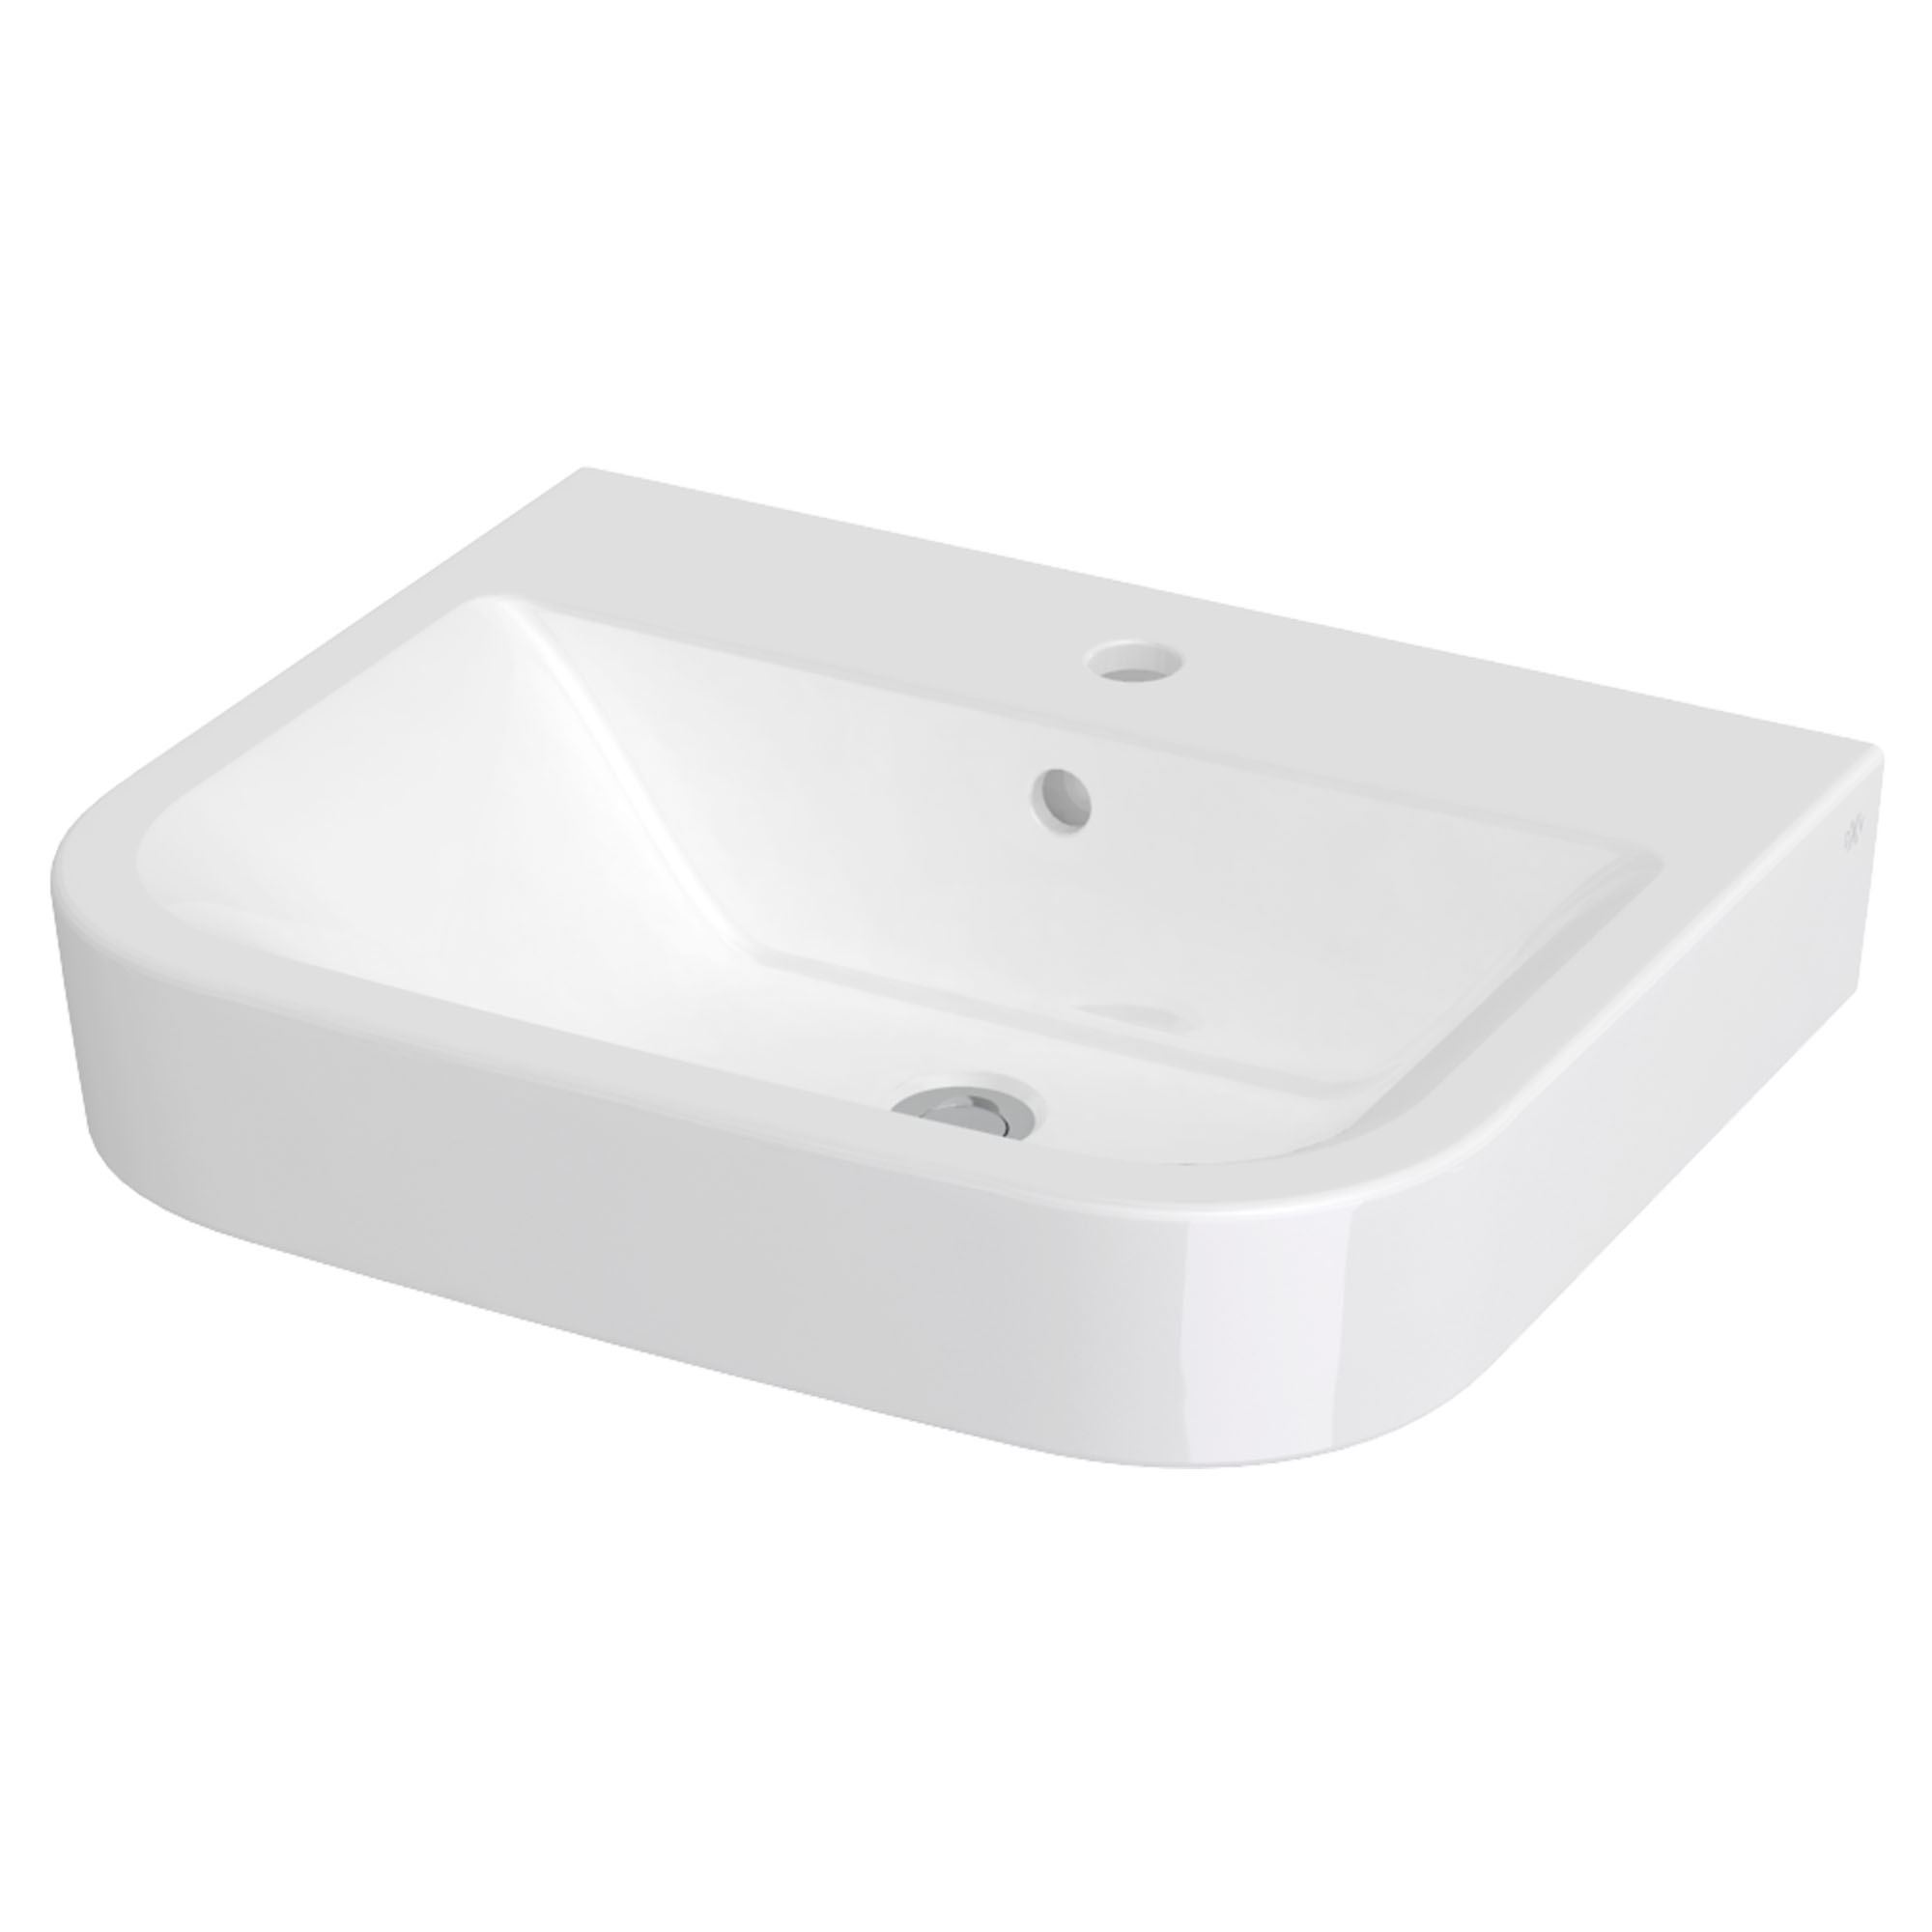 EQUILITY 22-In Single Hole Wall-Hung Bathroom Sink  - PROJECTS MODEL